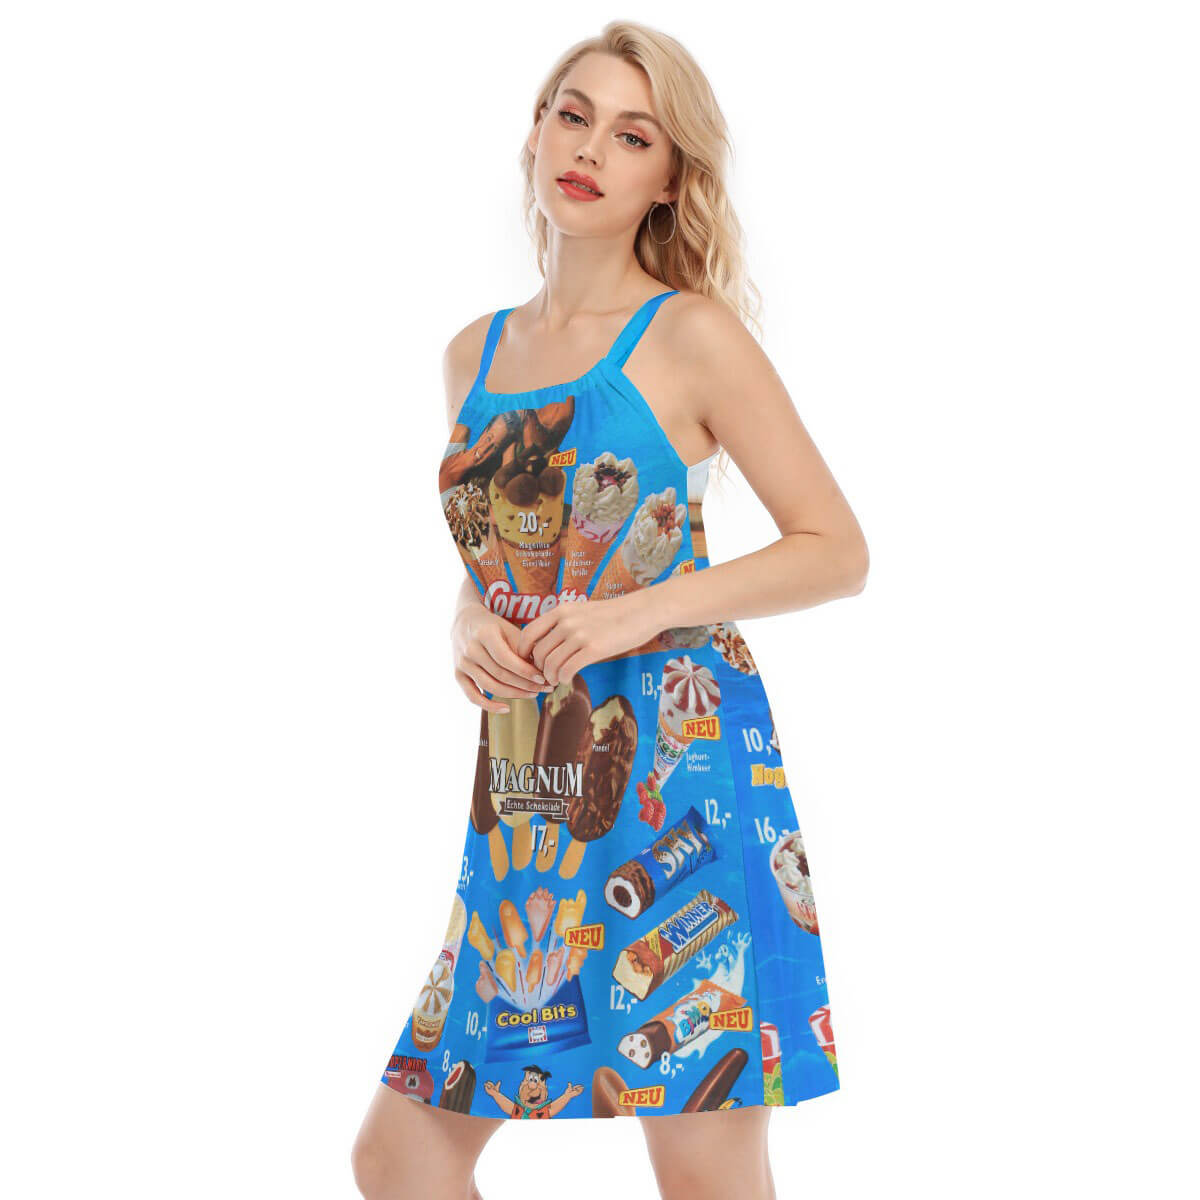 A vibrant sleeveless cami dress with a colorful ice cream print.